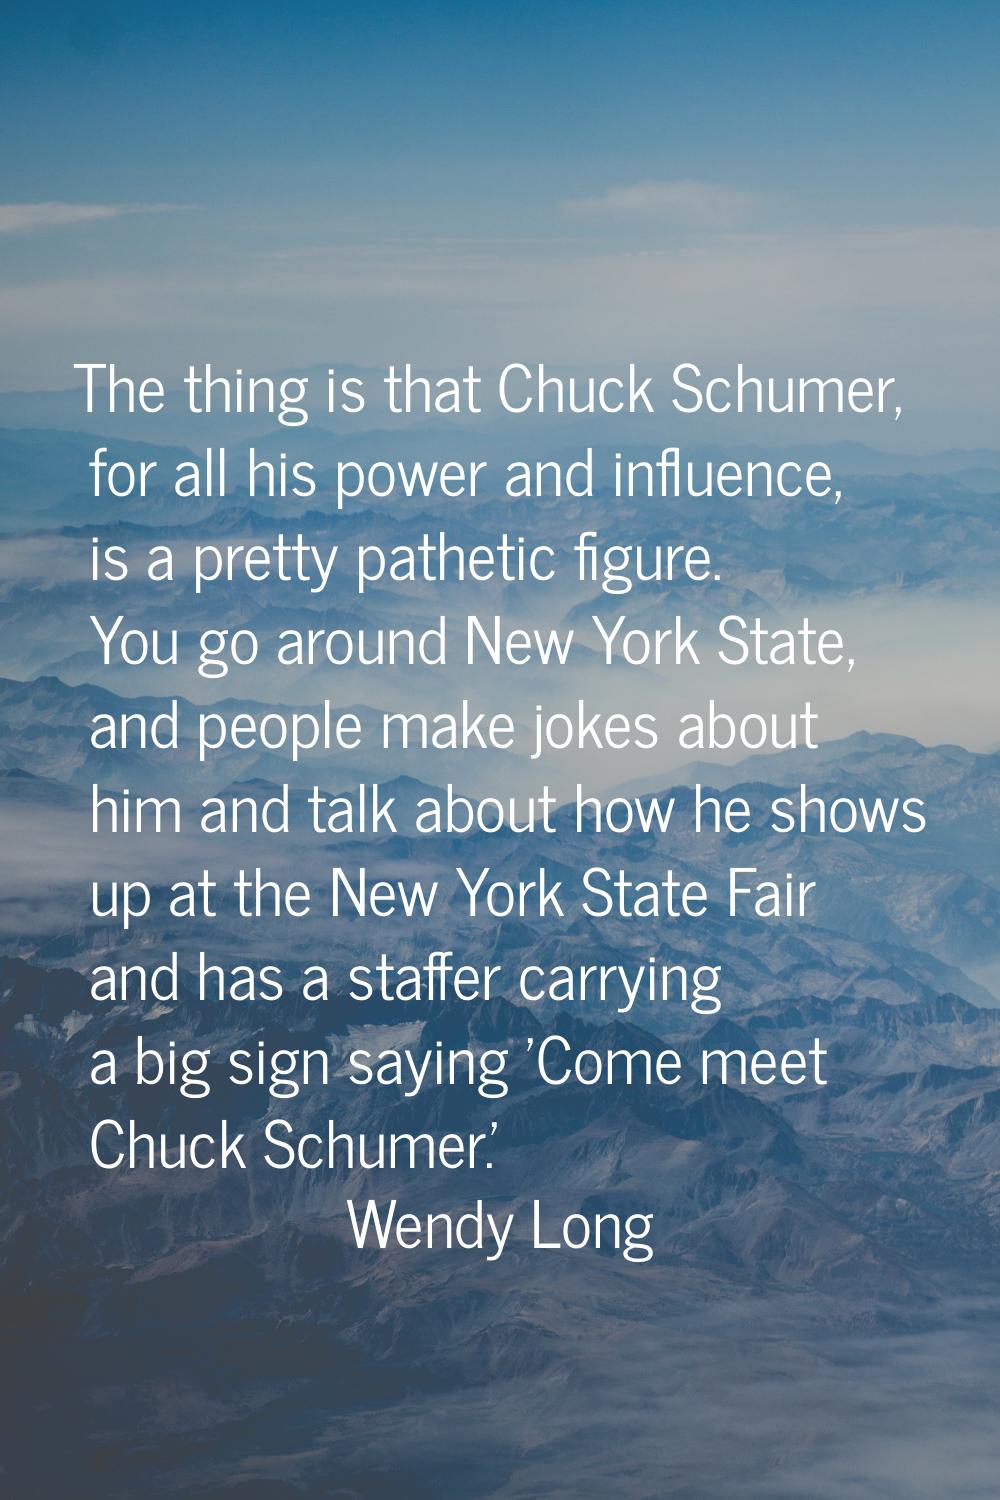 The thing is that Chuck Schumer, for all his power and influence, is a pretty pathetic figure. You 